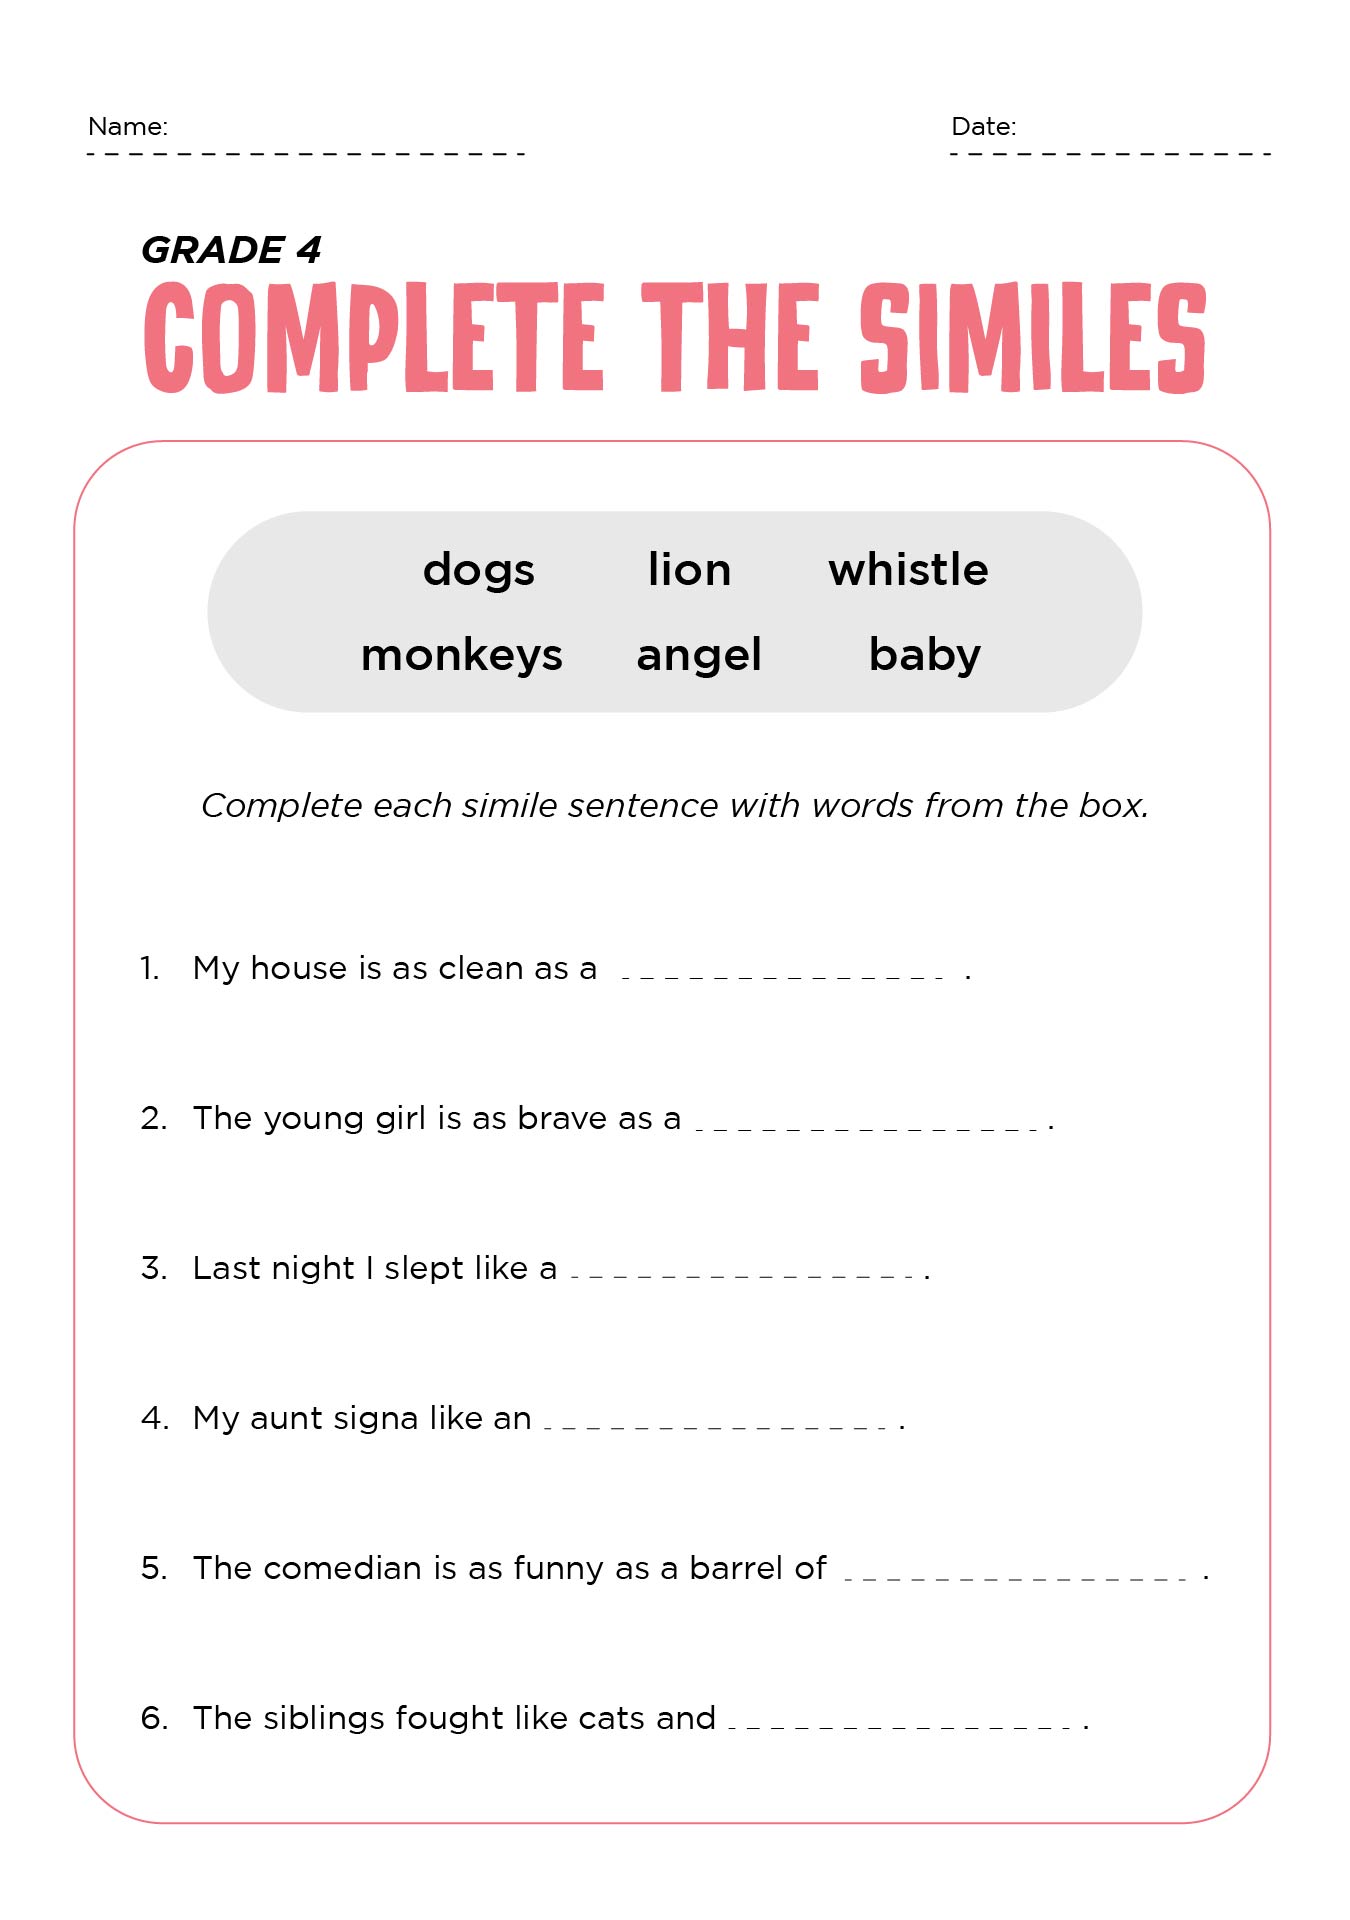 5-best-images-of-4th-grade-grammar-printable-synonyms-and-antonyms